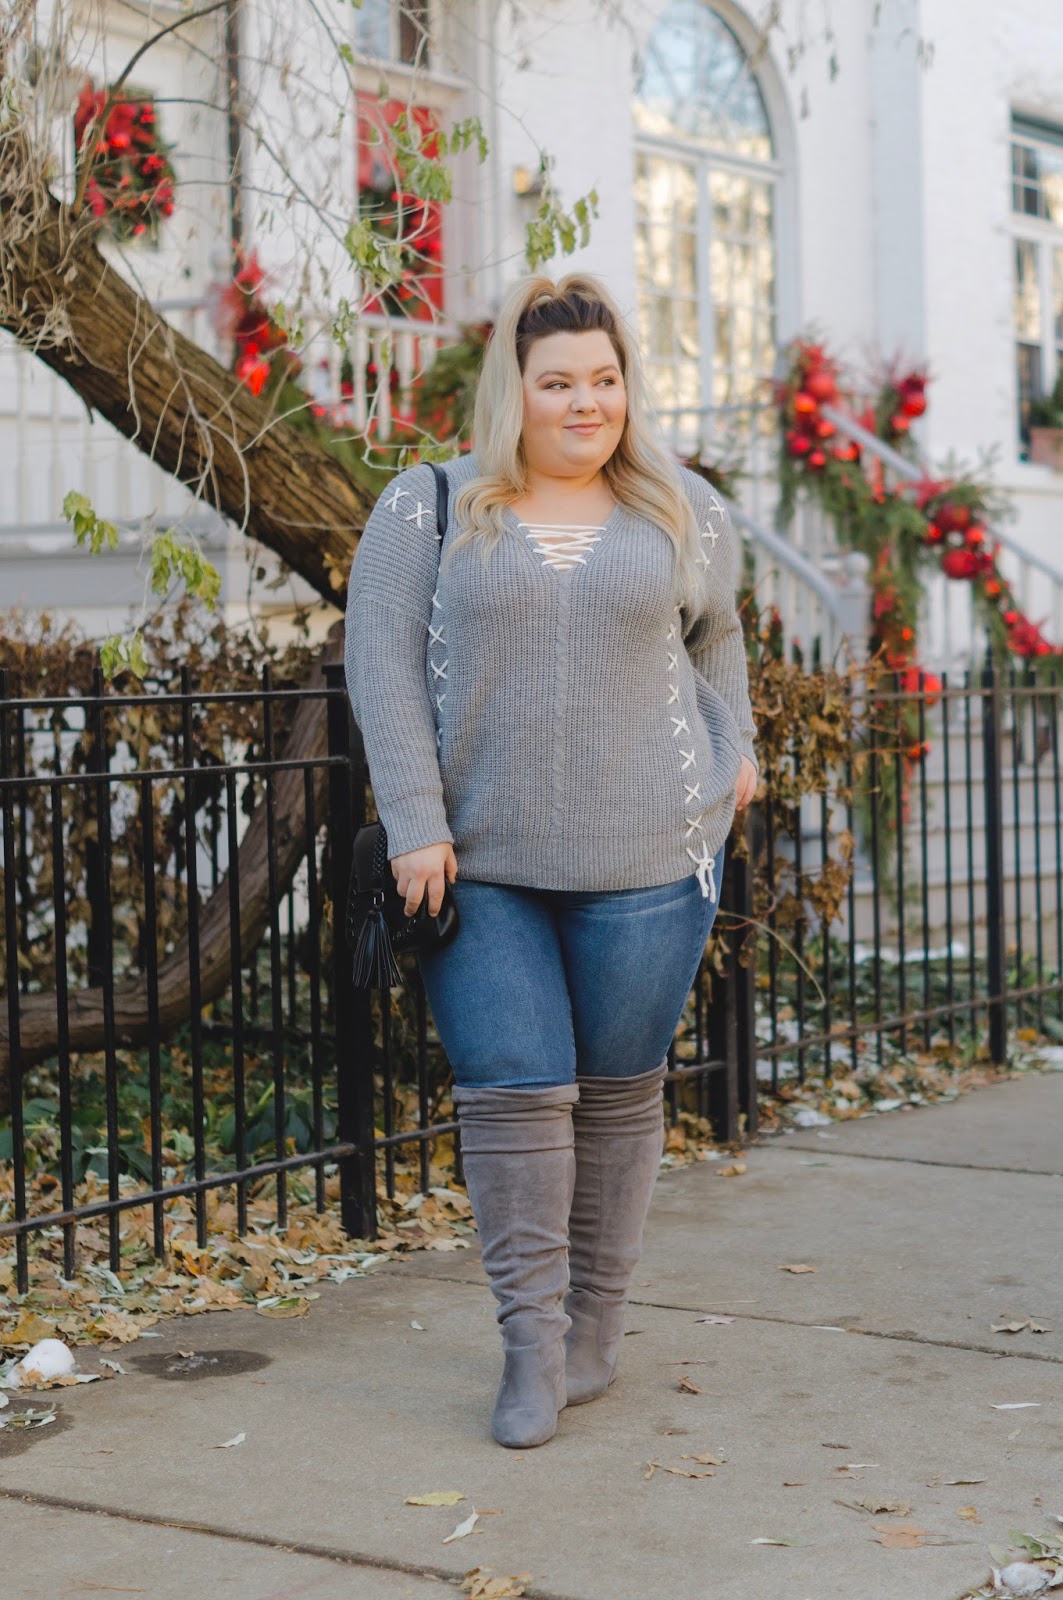 natalie in the city, Chicago model, Chicago fashion blogger, plus size fashion blogger, plus size style, plus model magazine, eff your beauty standards, embrace my curves, Charlotte Russe plus, tummy control jeans, affordable plus size fashion for women, wide calf knee high boots, faux suede wide calf boots, wide calf sock boots